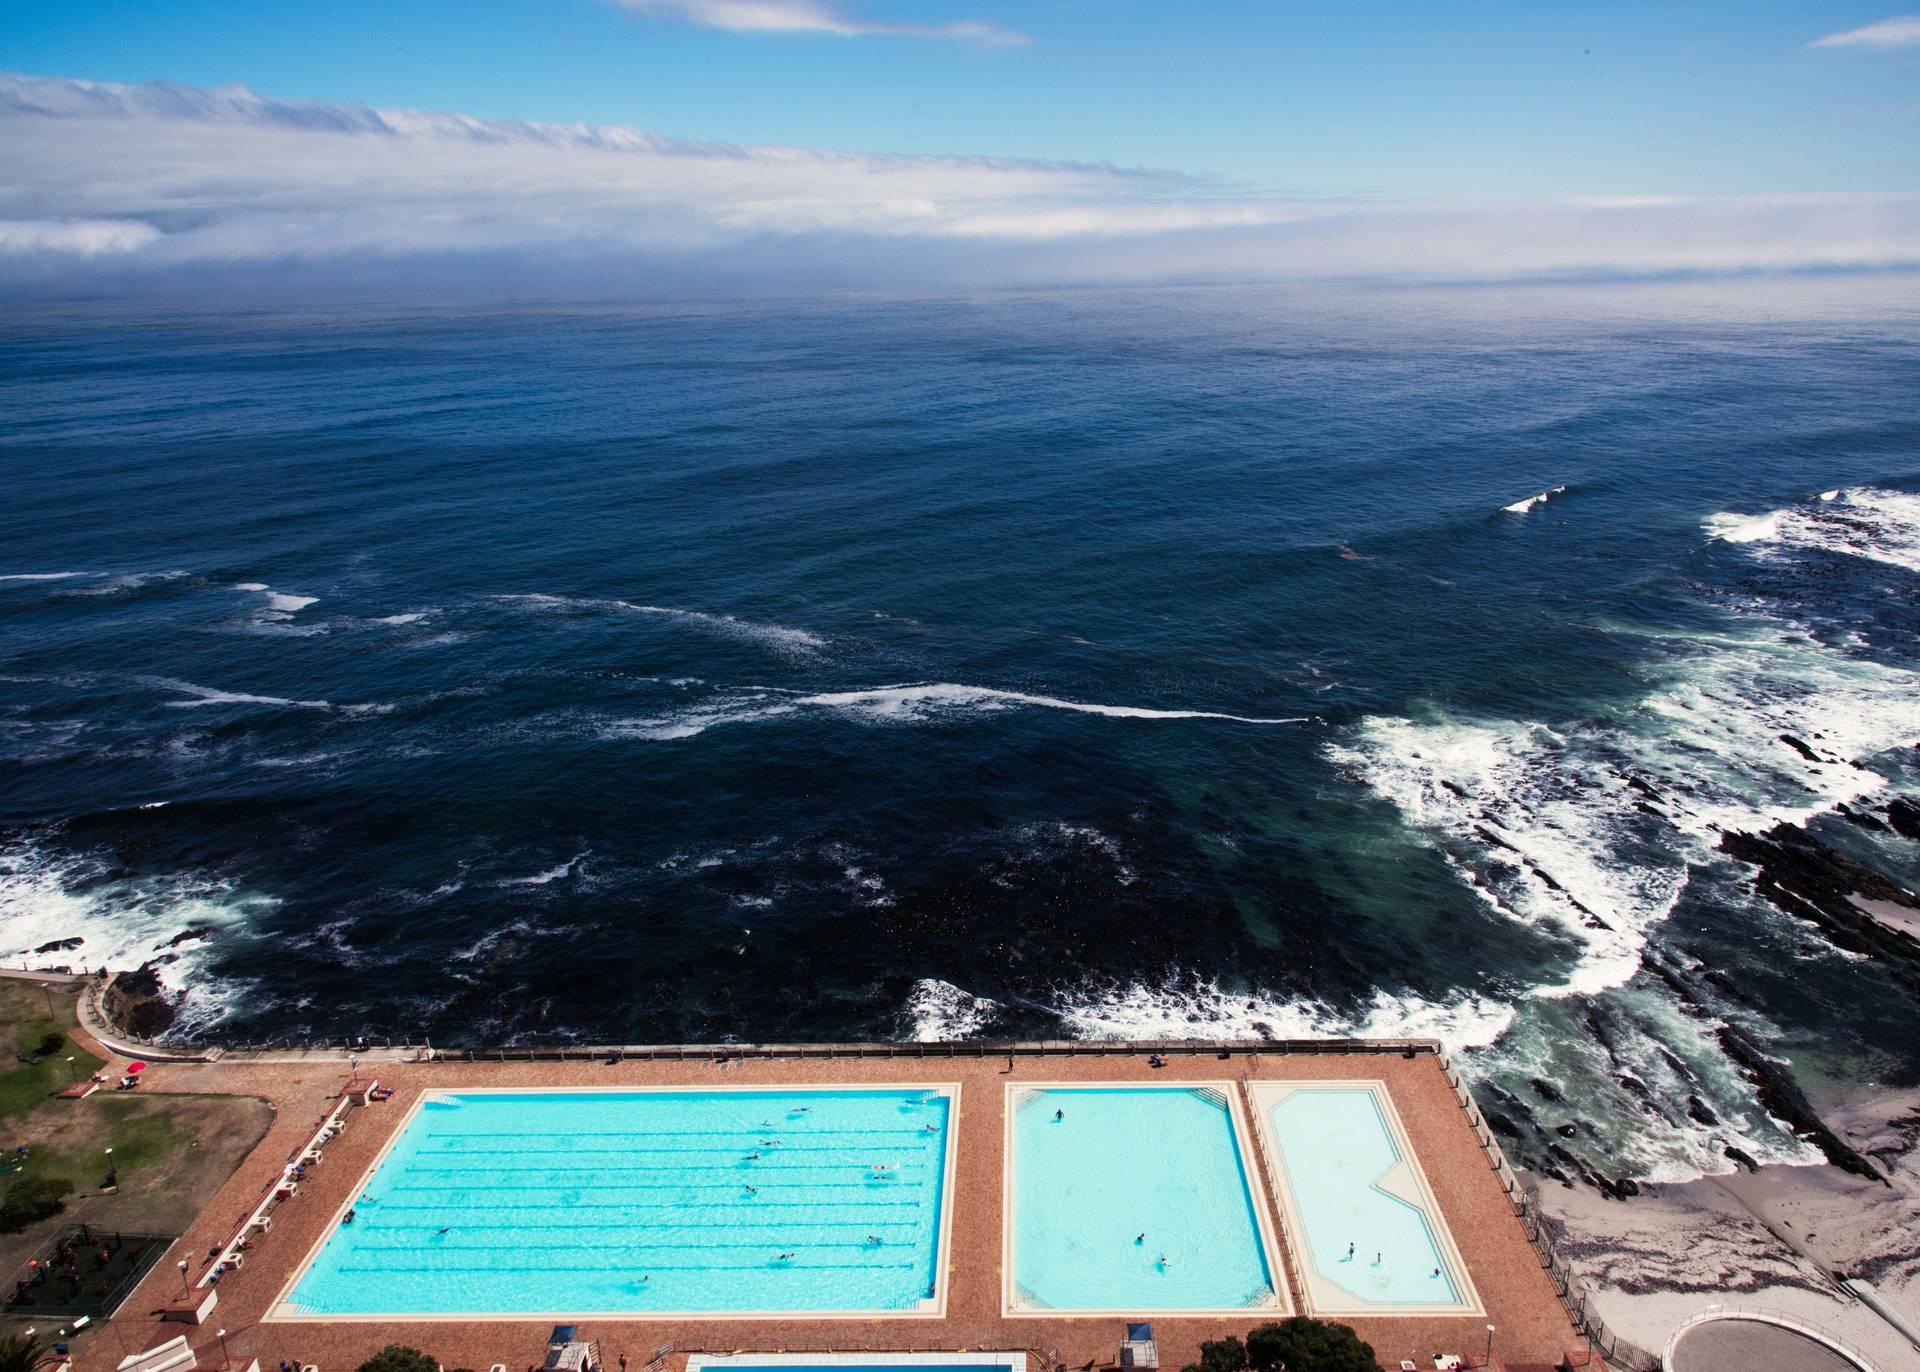 A utopian swimming pool right by the ocean, which boggles my mind and fascinates me at the same time.